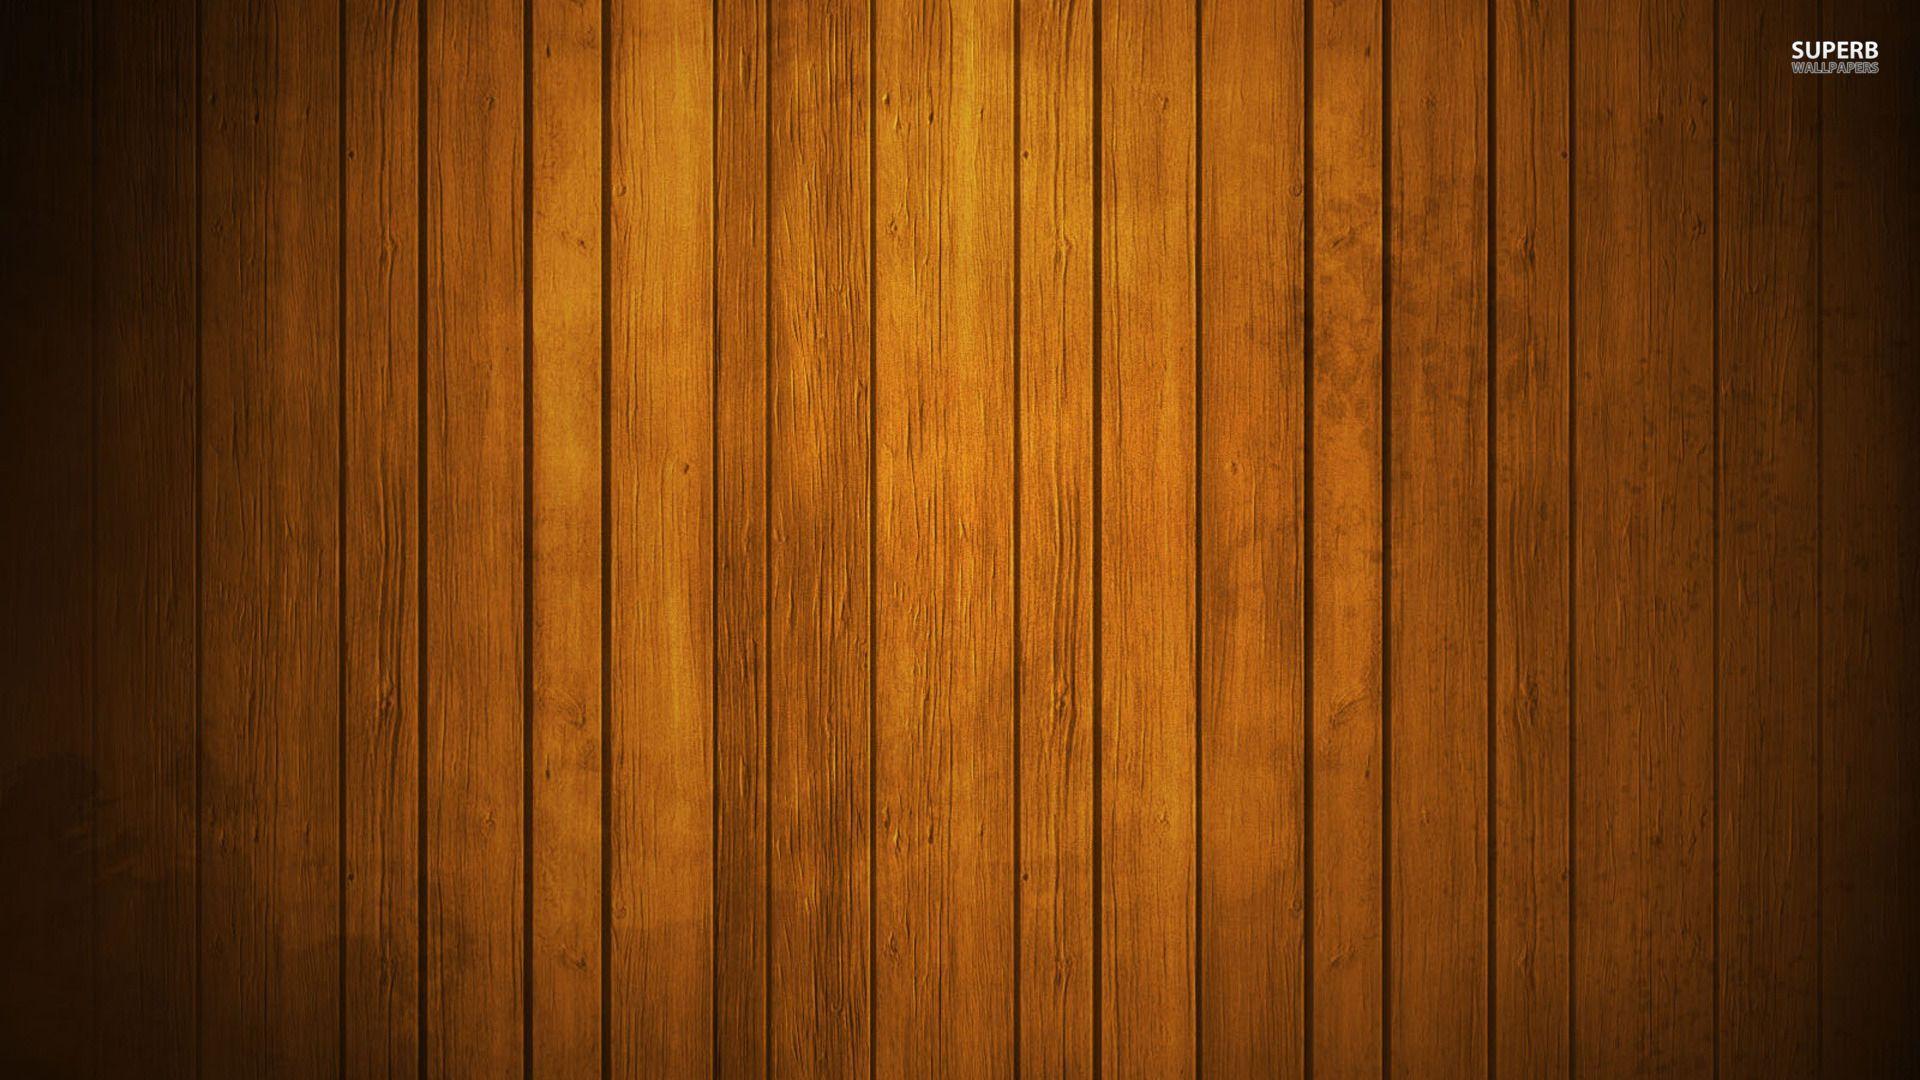 10 Wood Wall Designs For Your Home  LBB